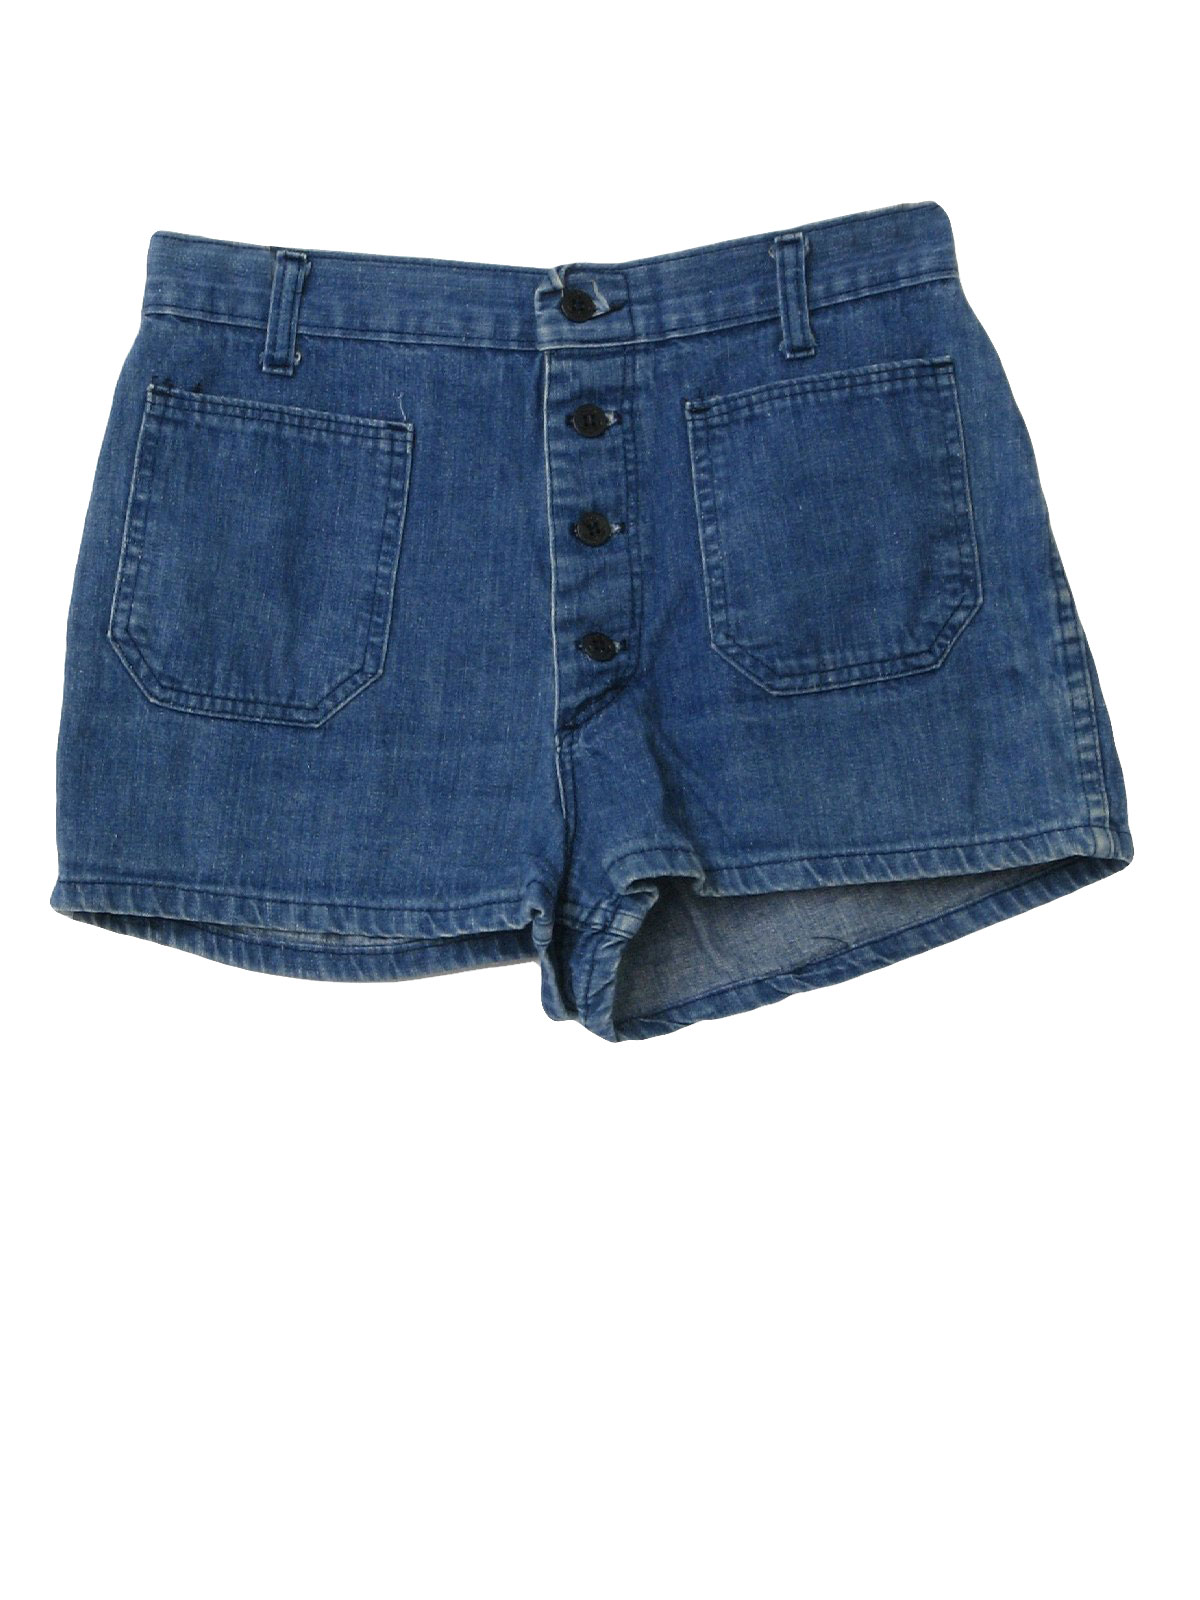 1970s Vintage Shorts: 70s -Missing Label- Womens medium blue thick ...